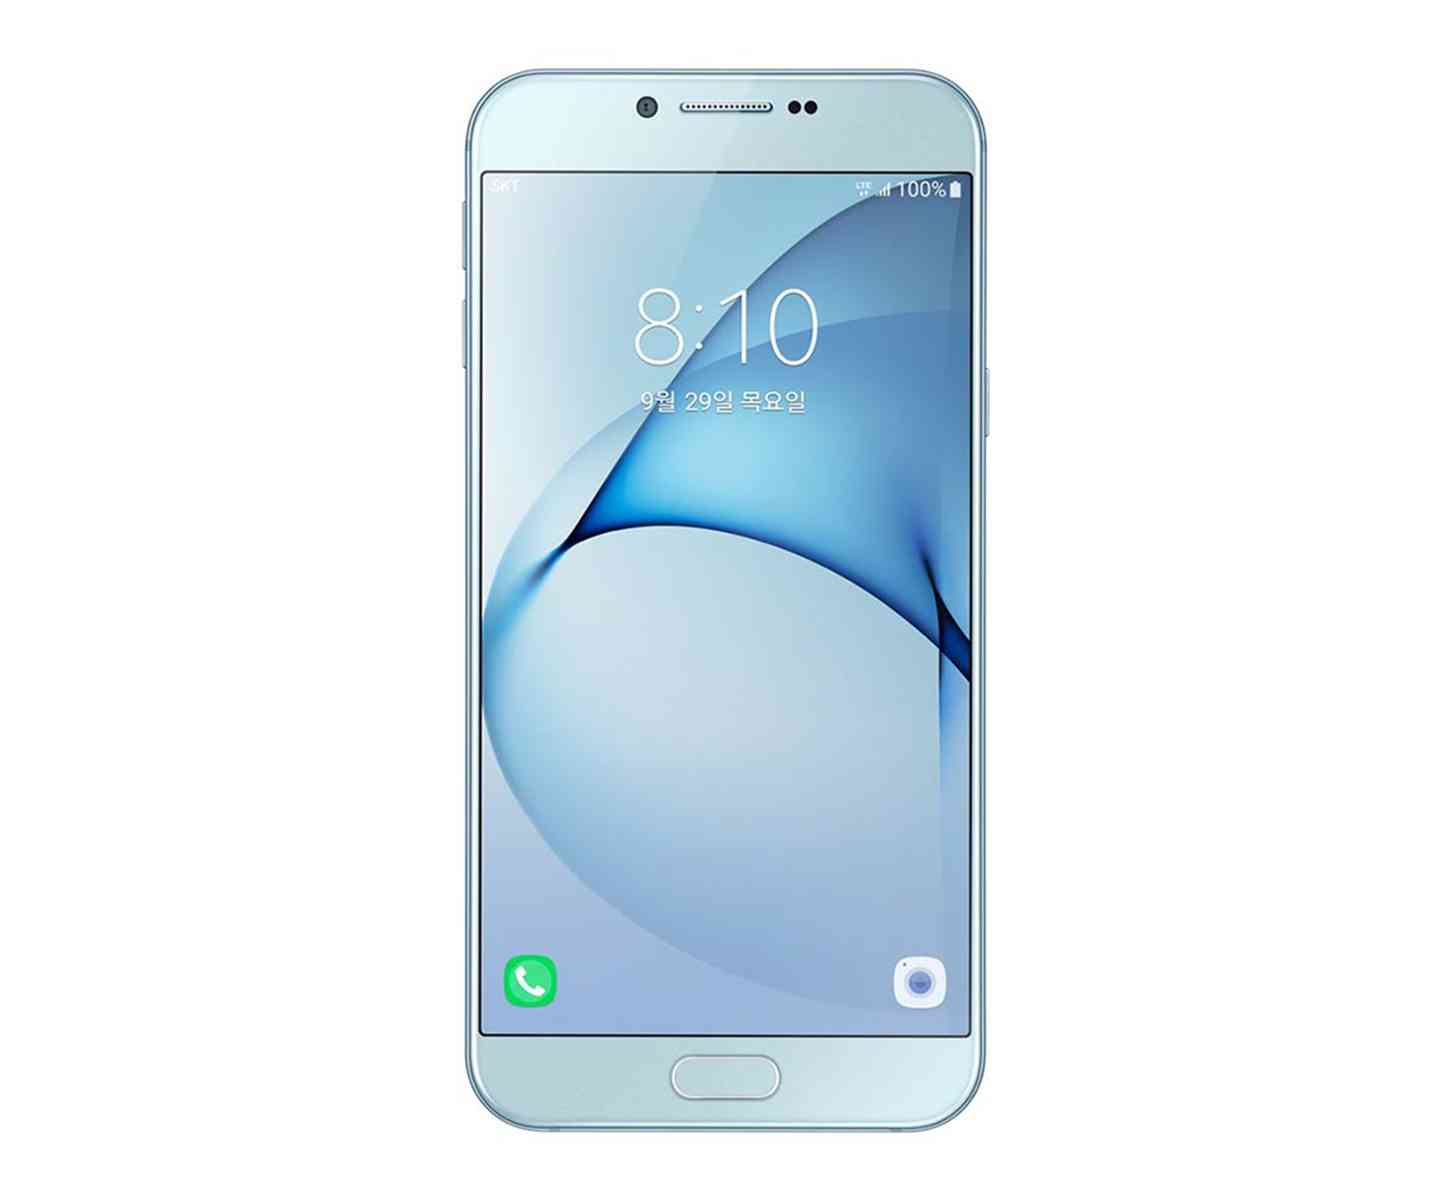 Samsung Galaxy A8 2016 official front